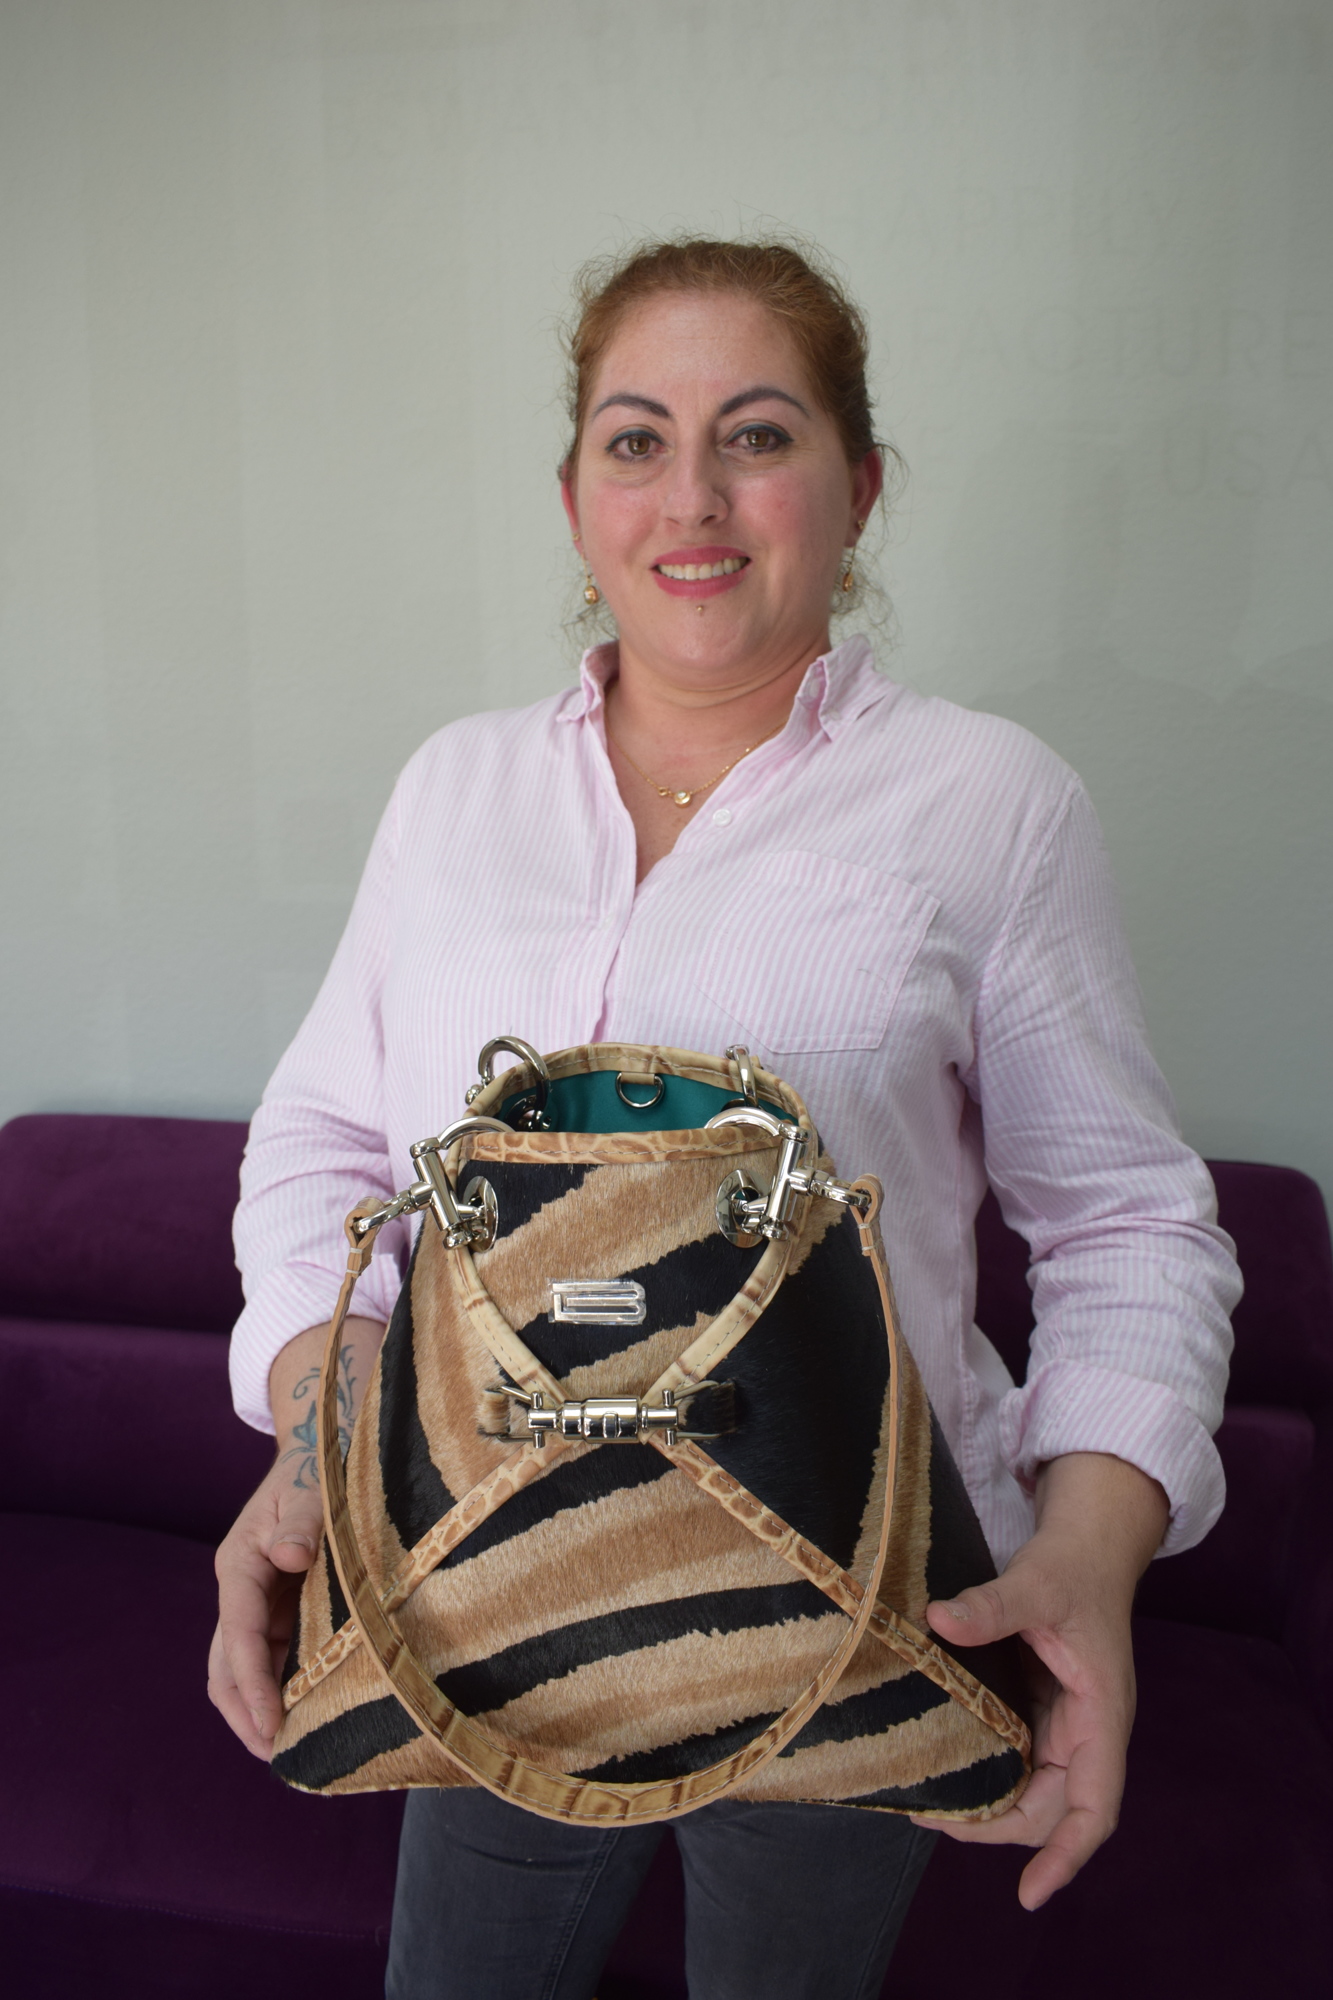 Kathy Reategui holds one of her favorite BSwanky designer handbags she helped to create.